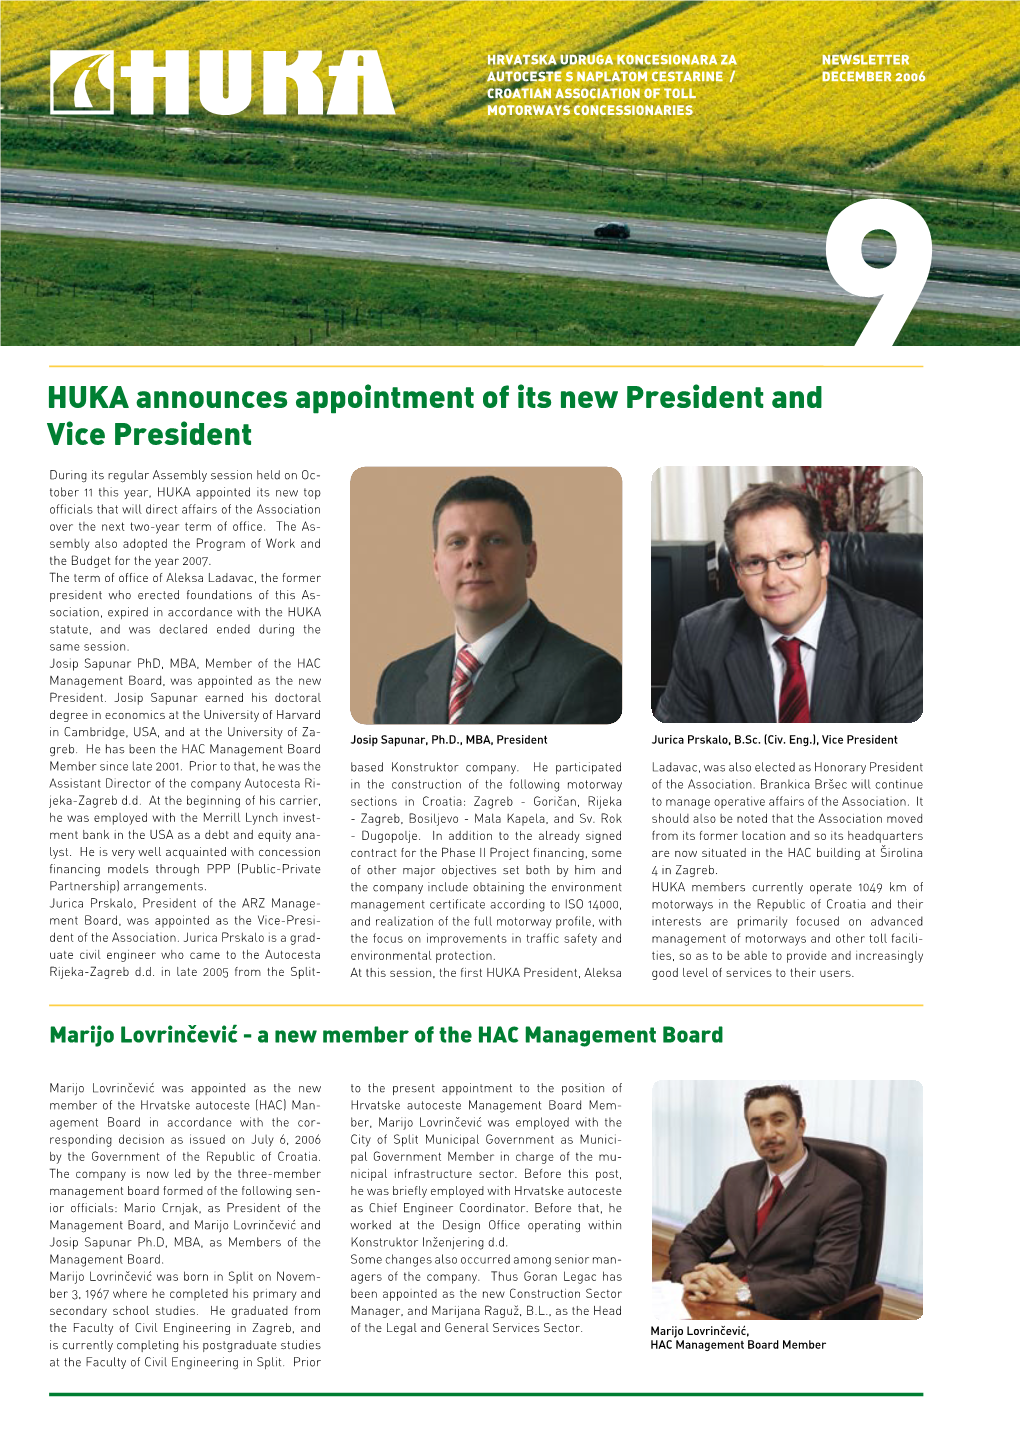 HUKA Announces Appointment of Its New President and Vice President